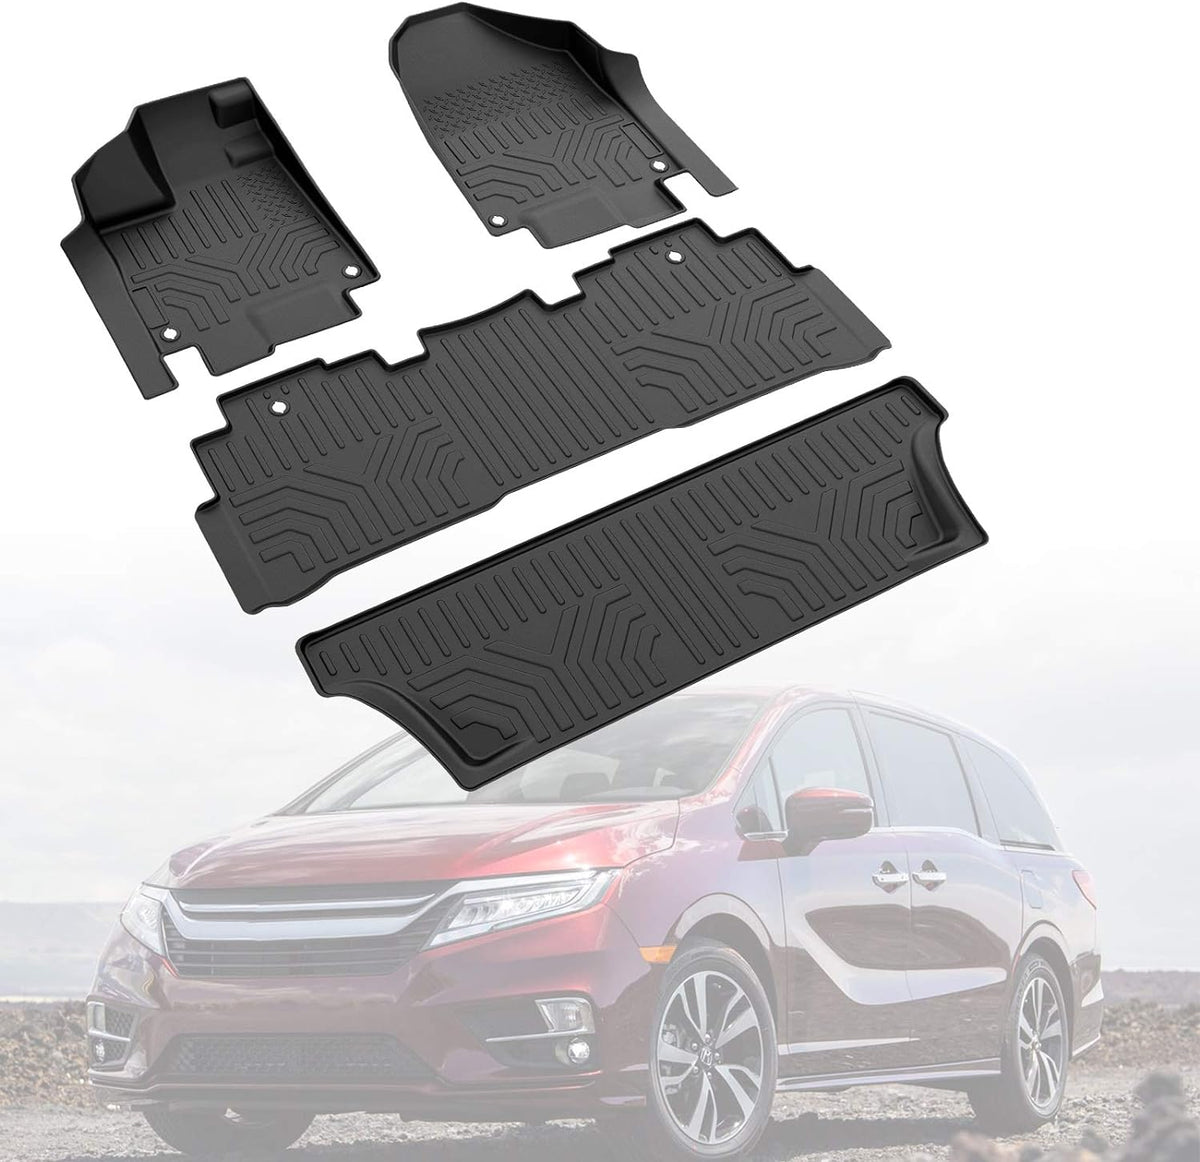 All Weather Guard Heavy Duty Floor Mats Compatible with 2018-2023 Honda Odyssey All Weather Guard Floor Mats Liners, 4 Doors, Front and Rear 3 Row Seat, Black